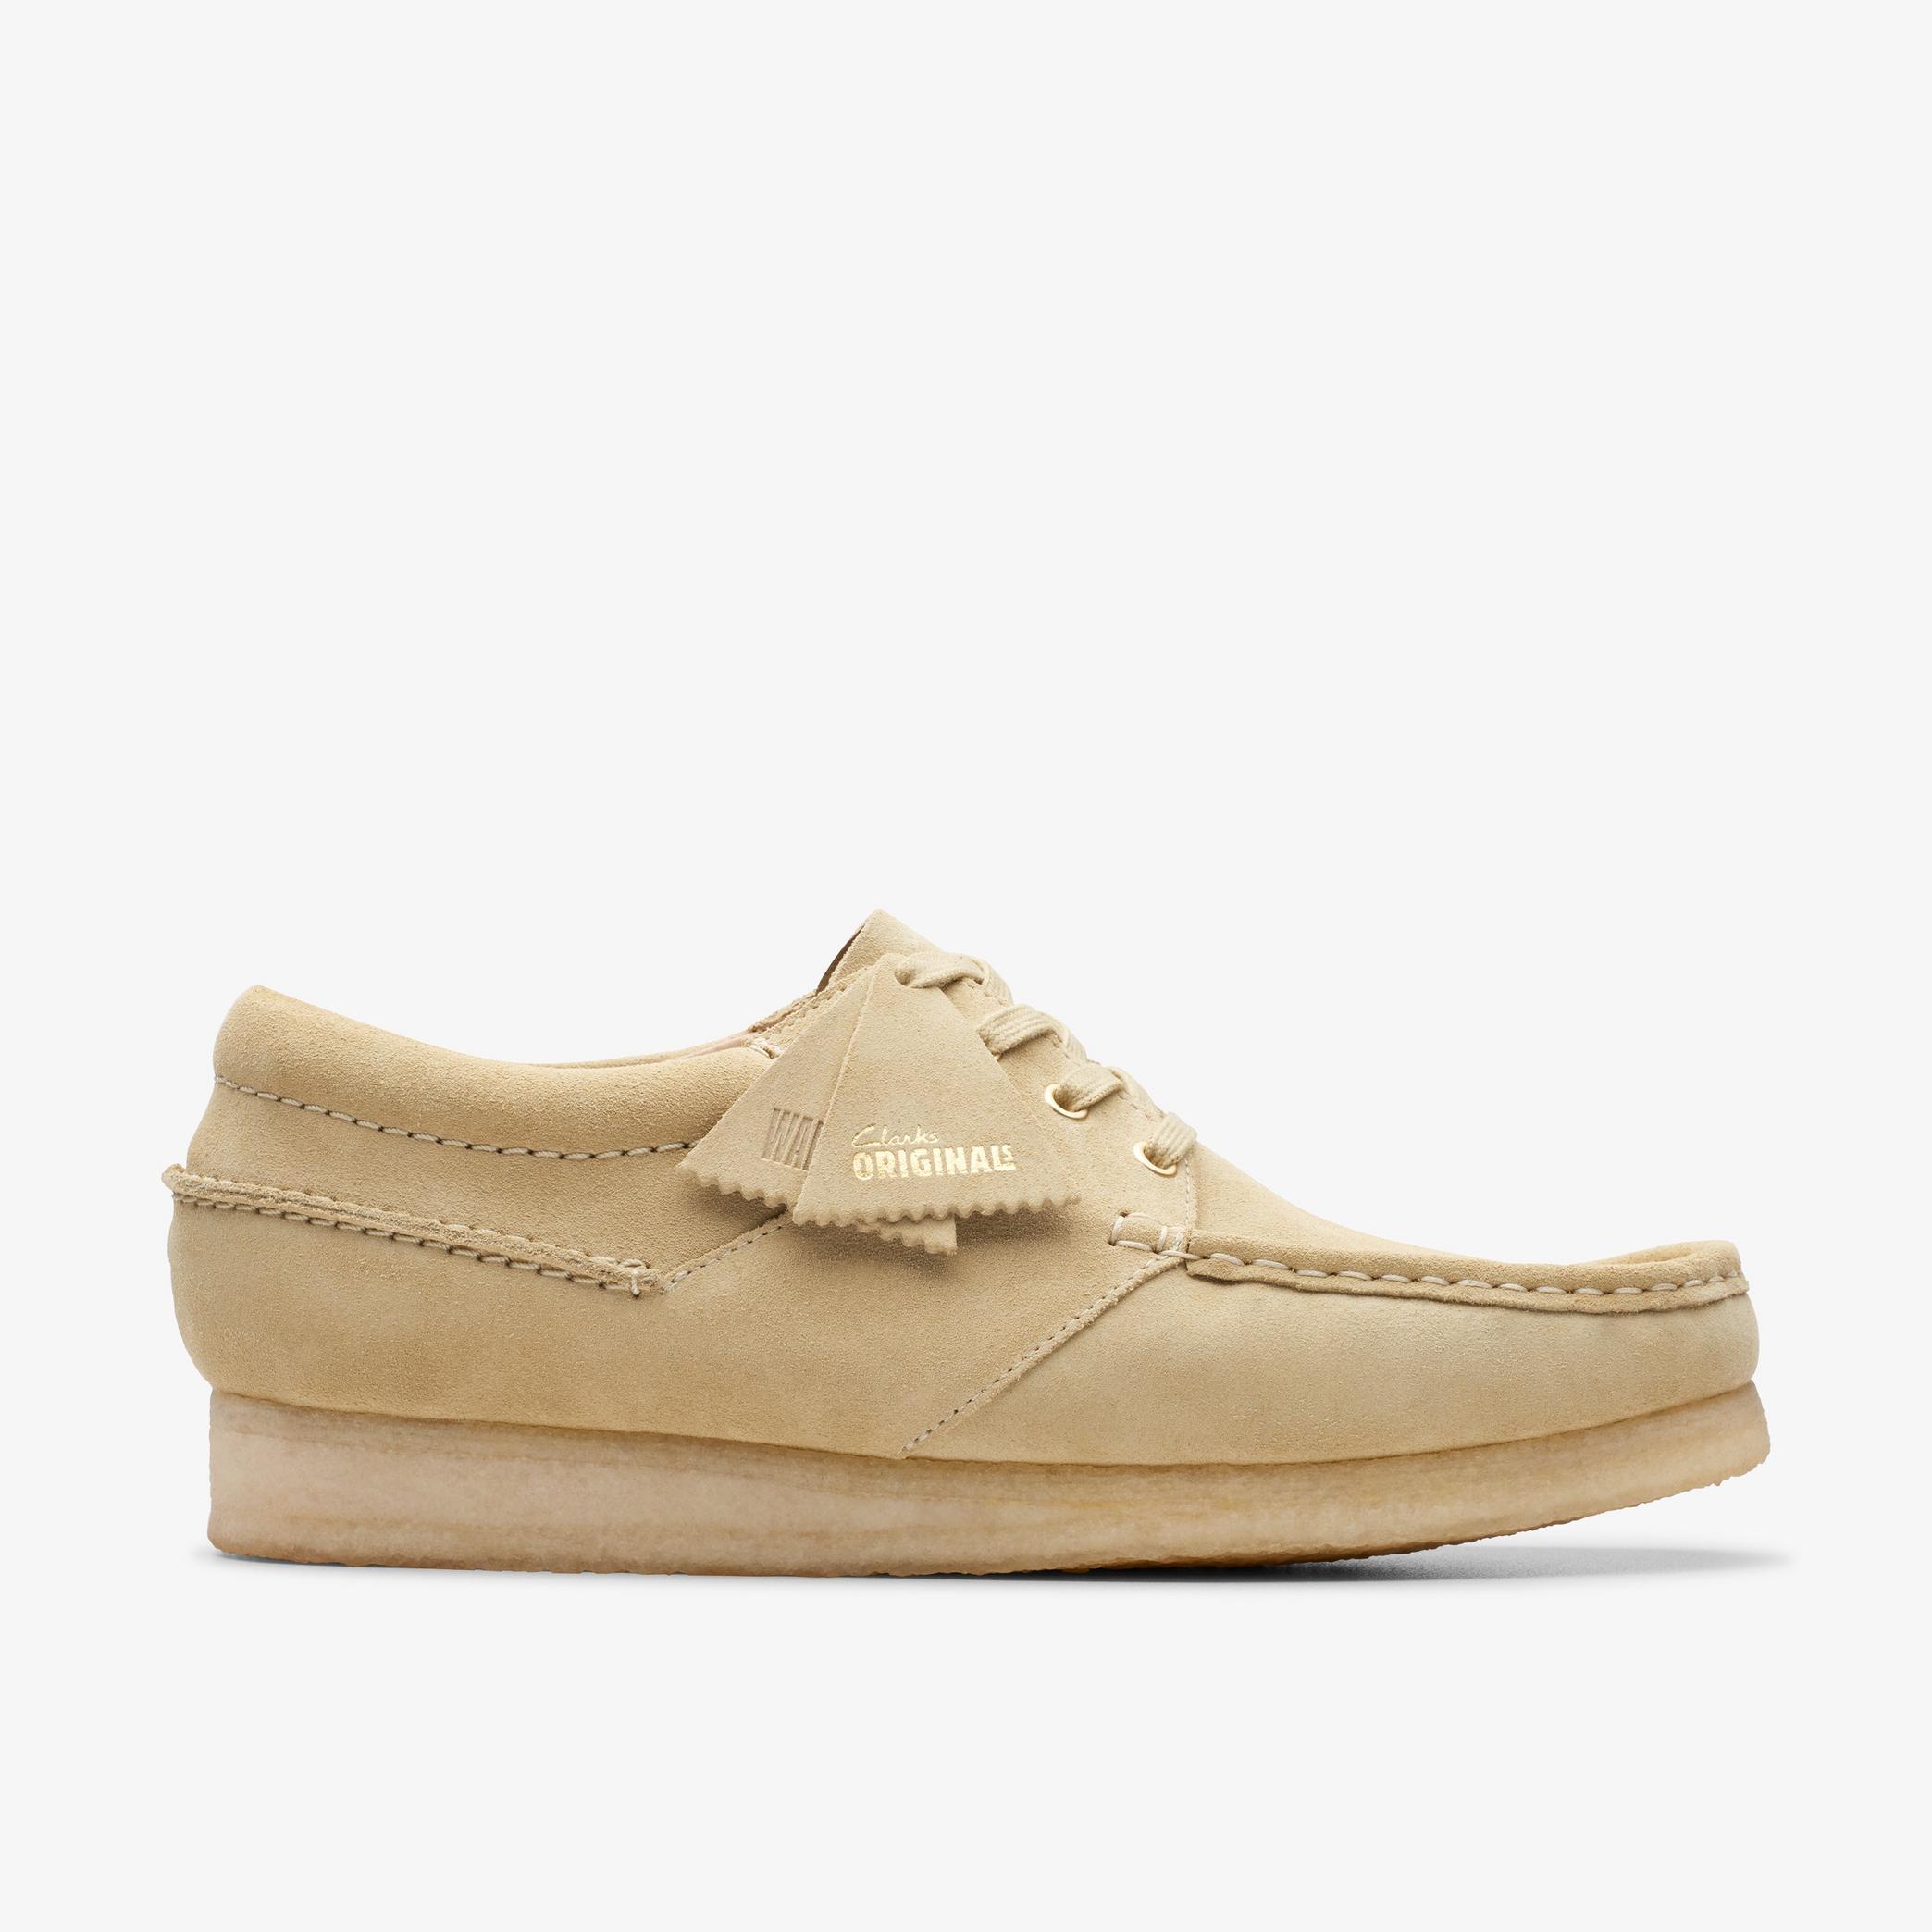 Wallabee Boat Maple Suede Wallabee, view 1 of 6